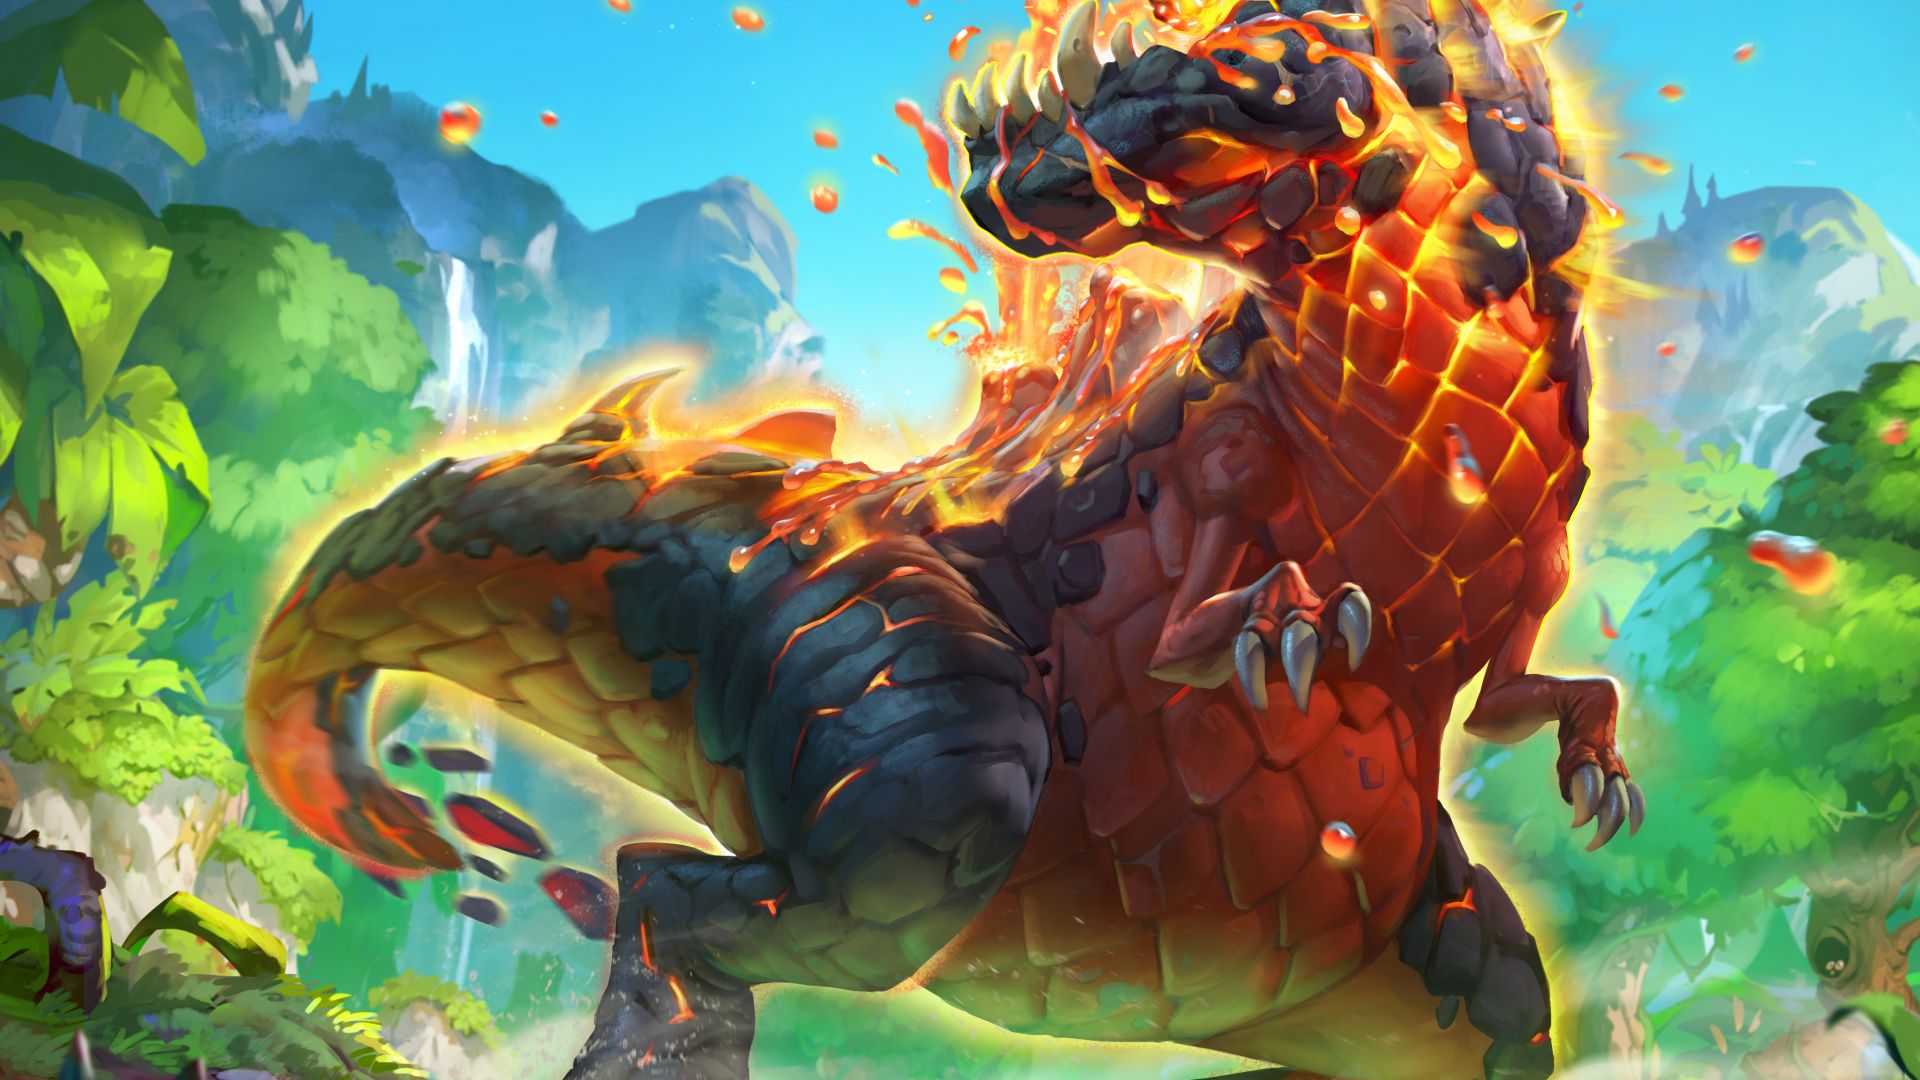 Wallpaper Fire, Dinosaur, Hearthstone: Heroes of Warcraft, video game